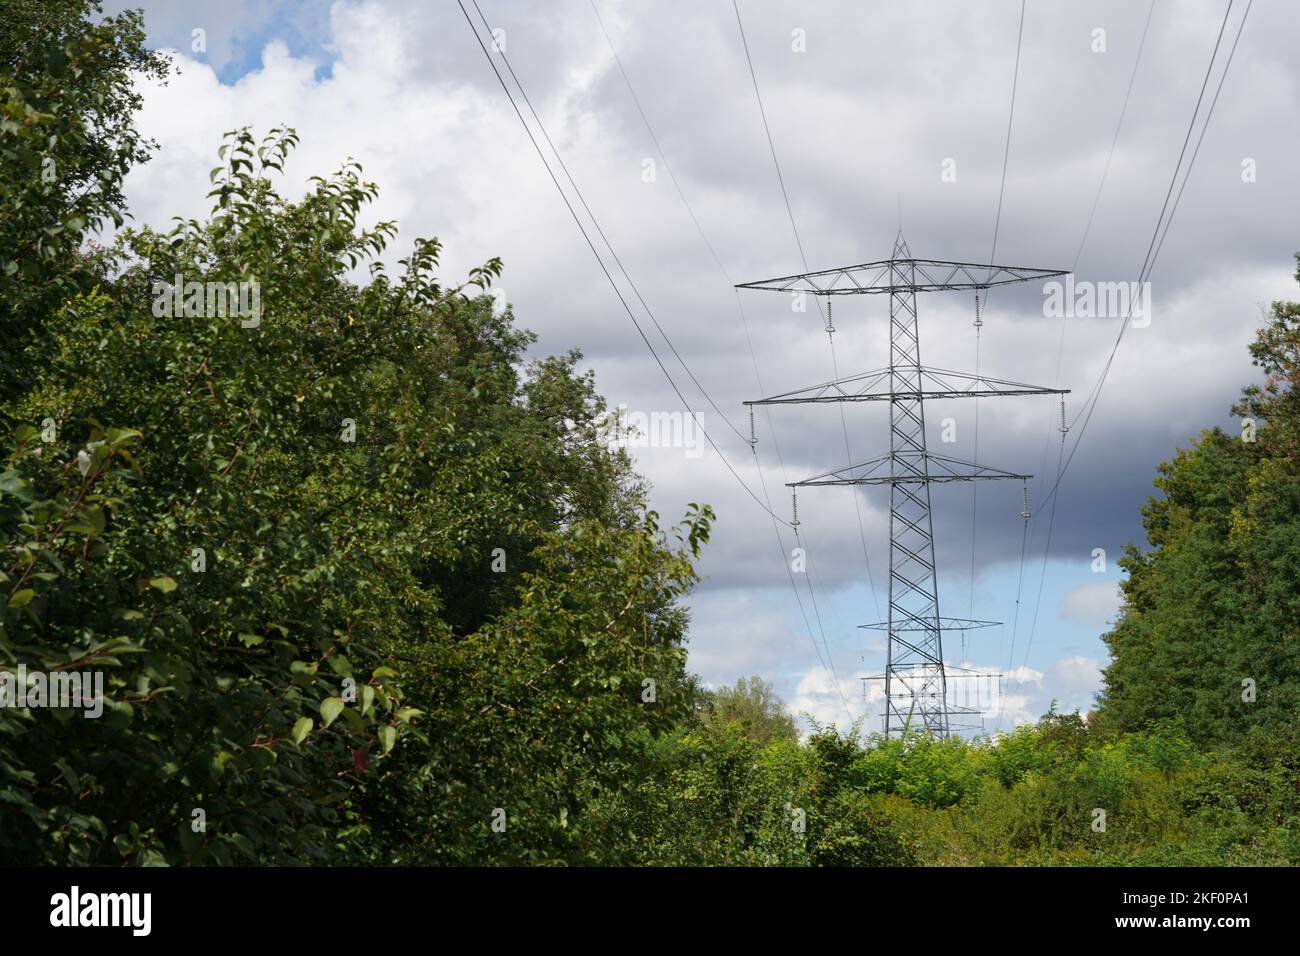 High voltage metal pylon for transfer of electricity with overhead wires between green trees. Stock Photo